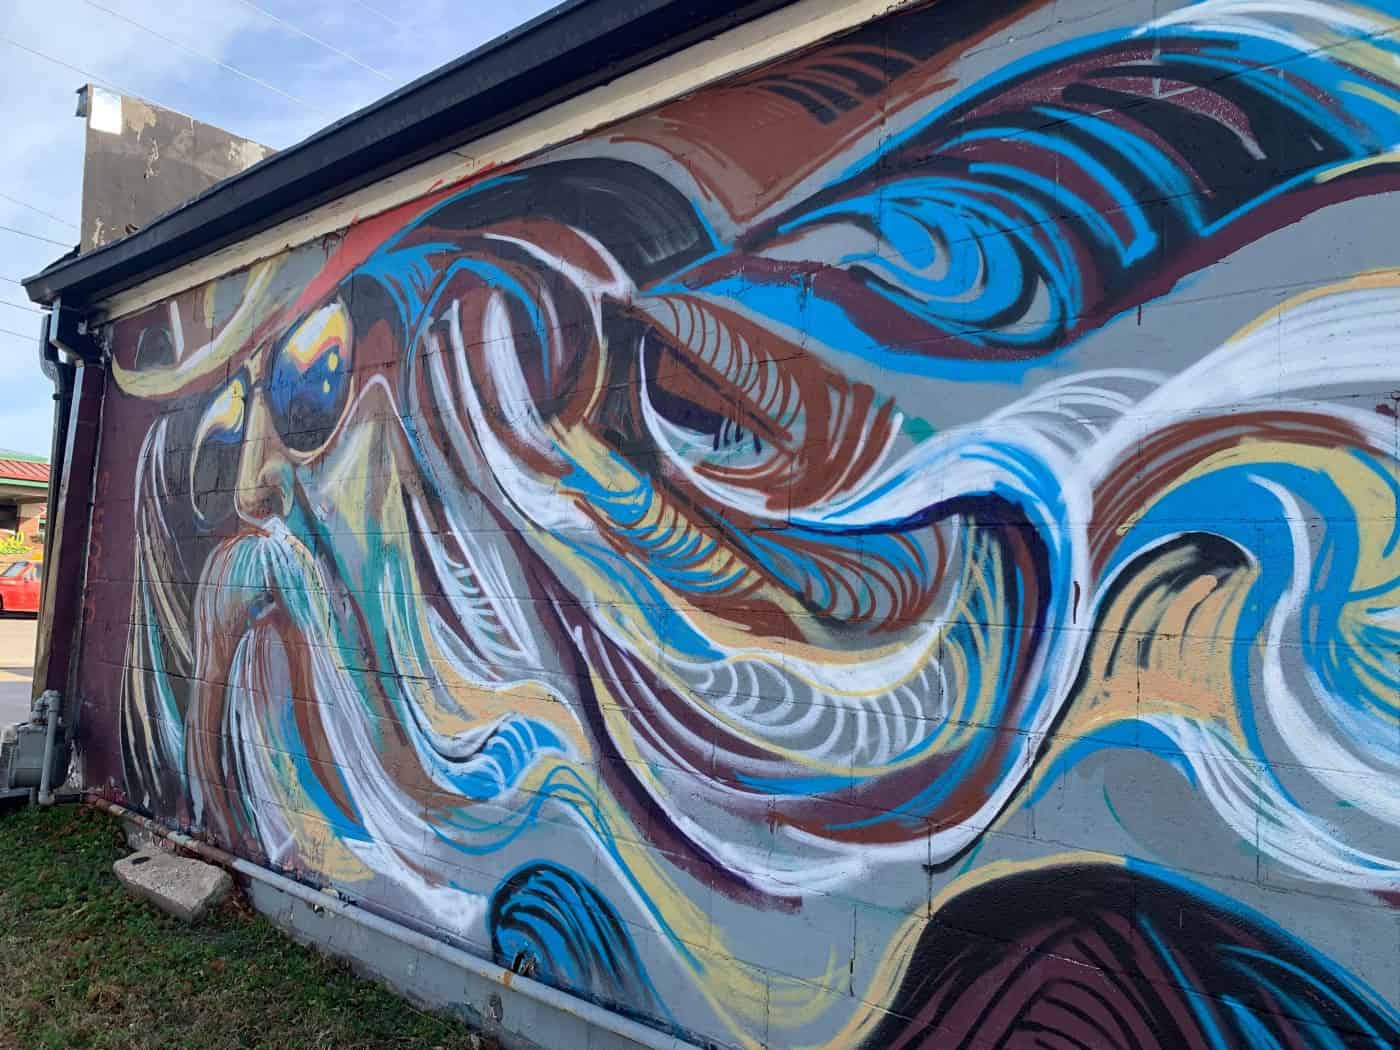 This wall mural of Leon Russell, titled Hail Factor, is located at 1016 E. 4th St. Tulsa's Jason Sales commissioned local artist Josh Butts to paint it.